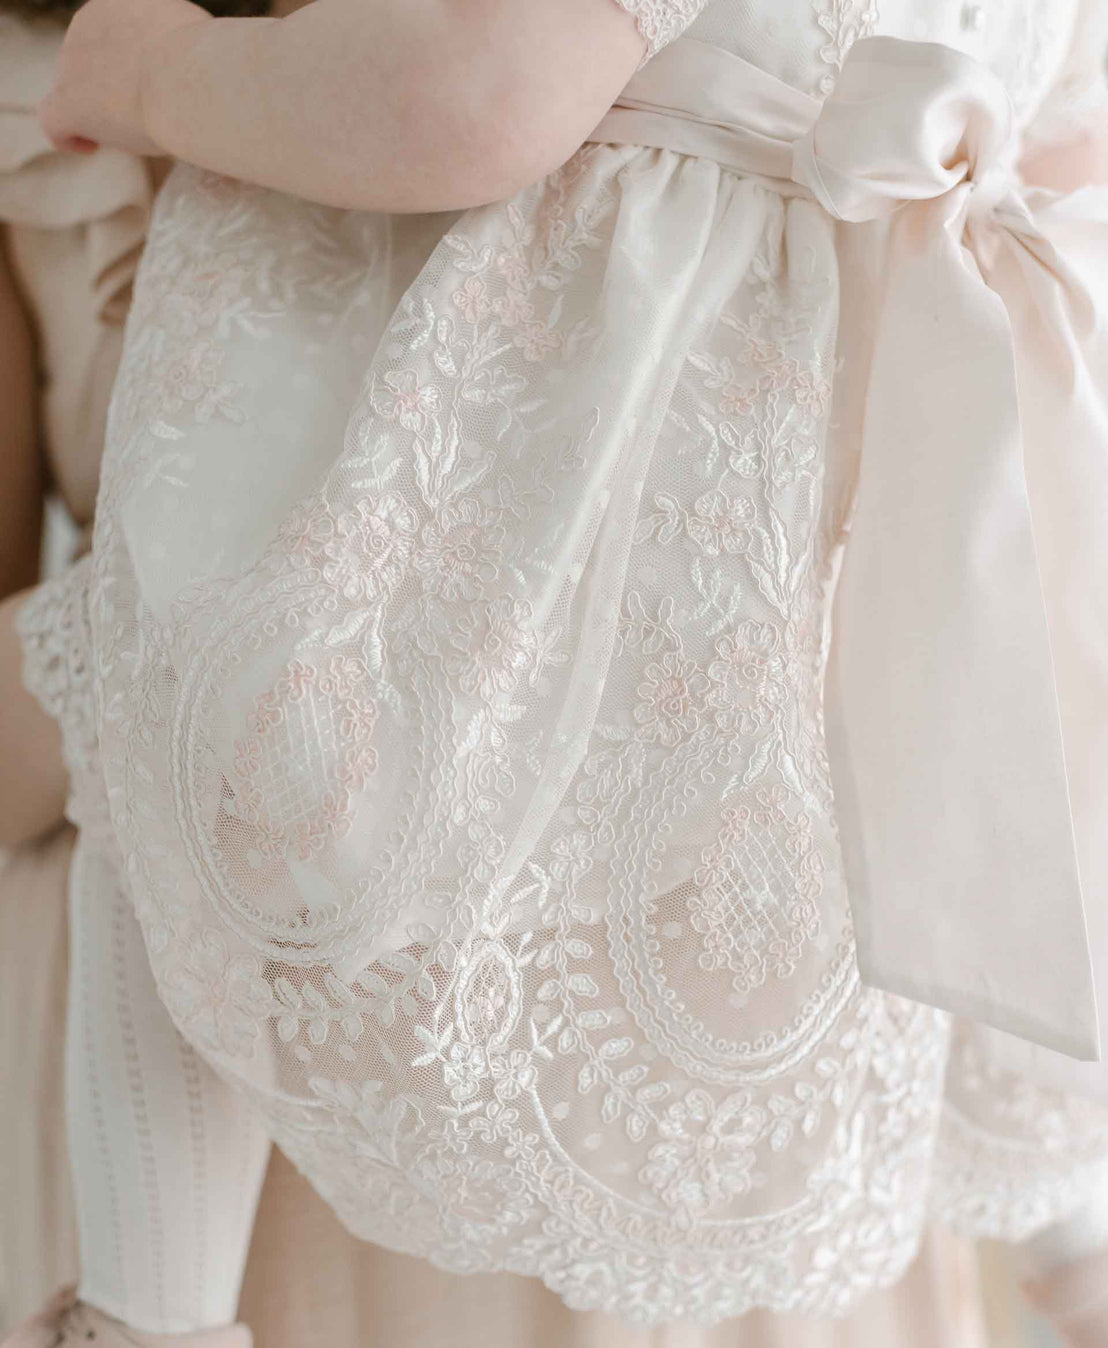 A close-up of a person holding the delicate, lace-adorned fabric of a Elizabeth Christening Dress, featuring intricate embroidery and a bow.